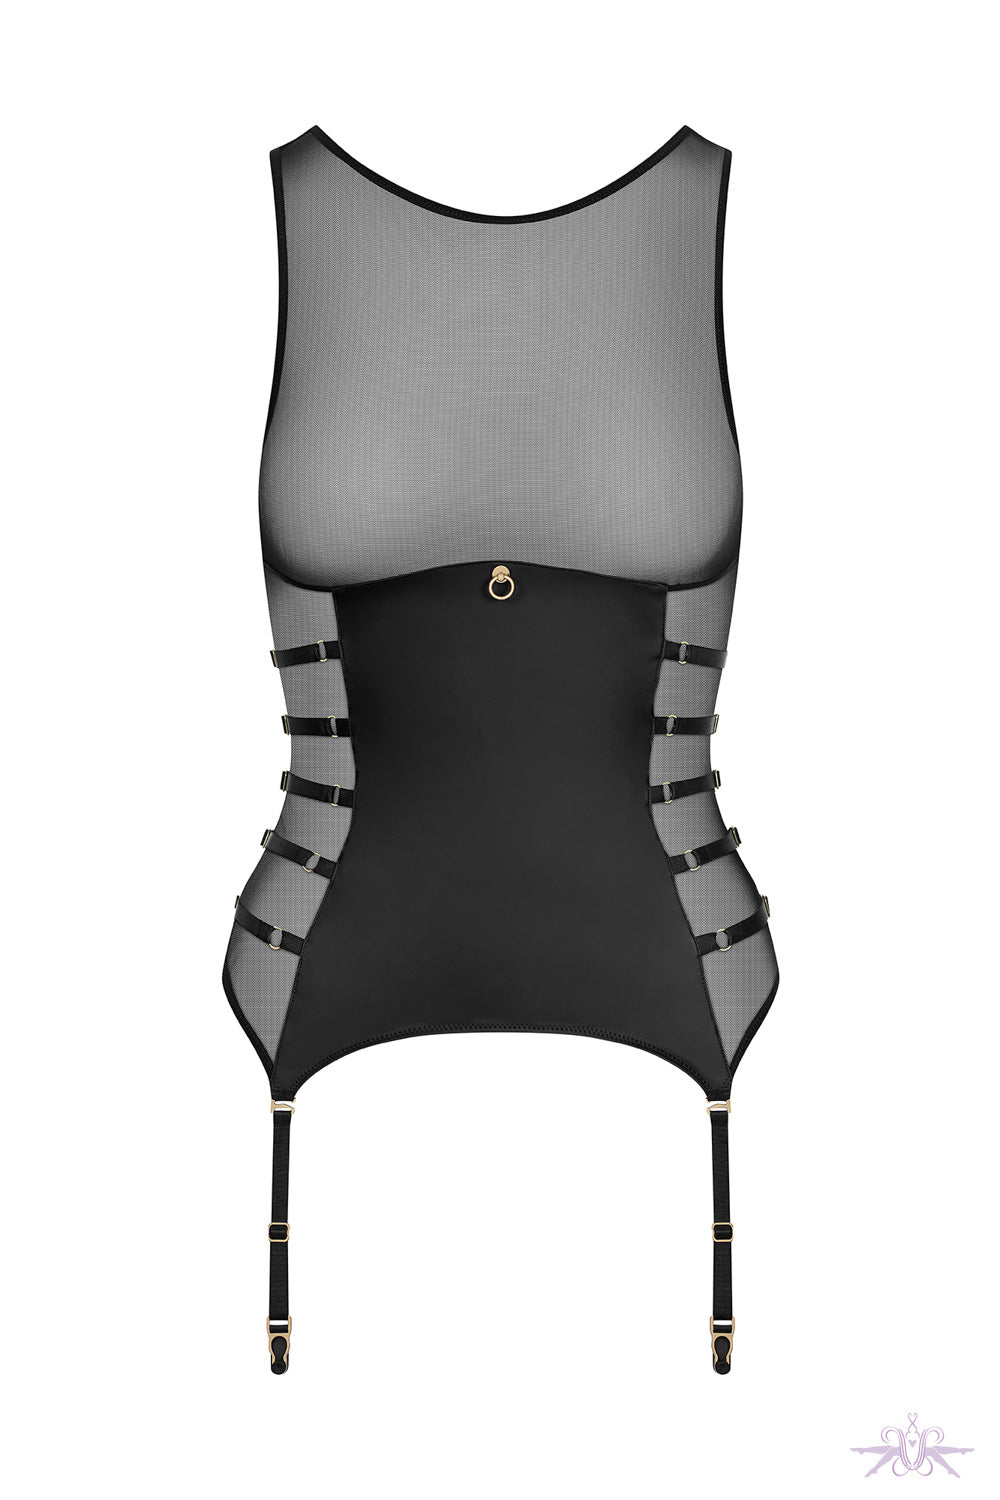 Maison Close Chambre Noire Tank Top with Suspenders at The Hosiery Box